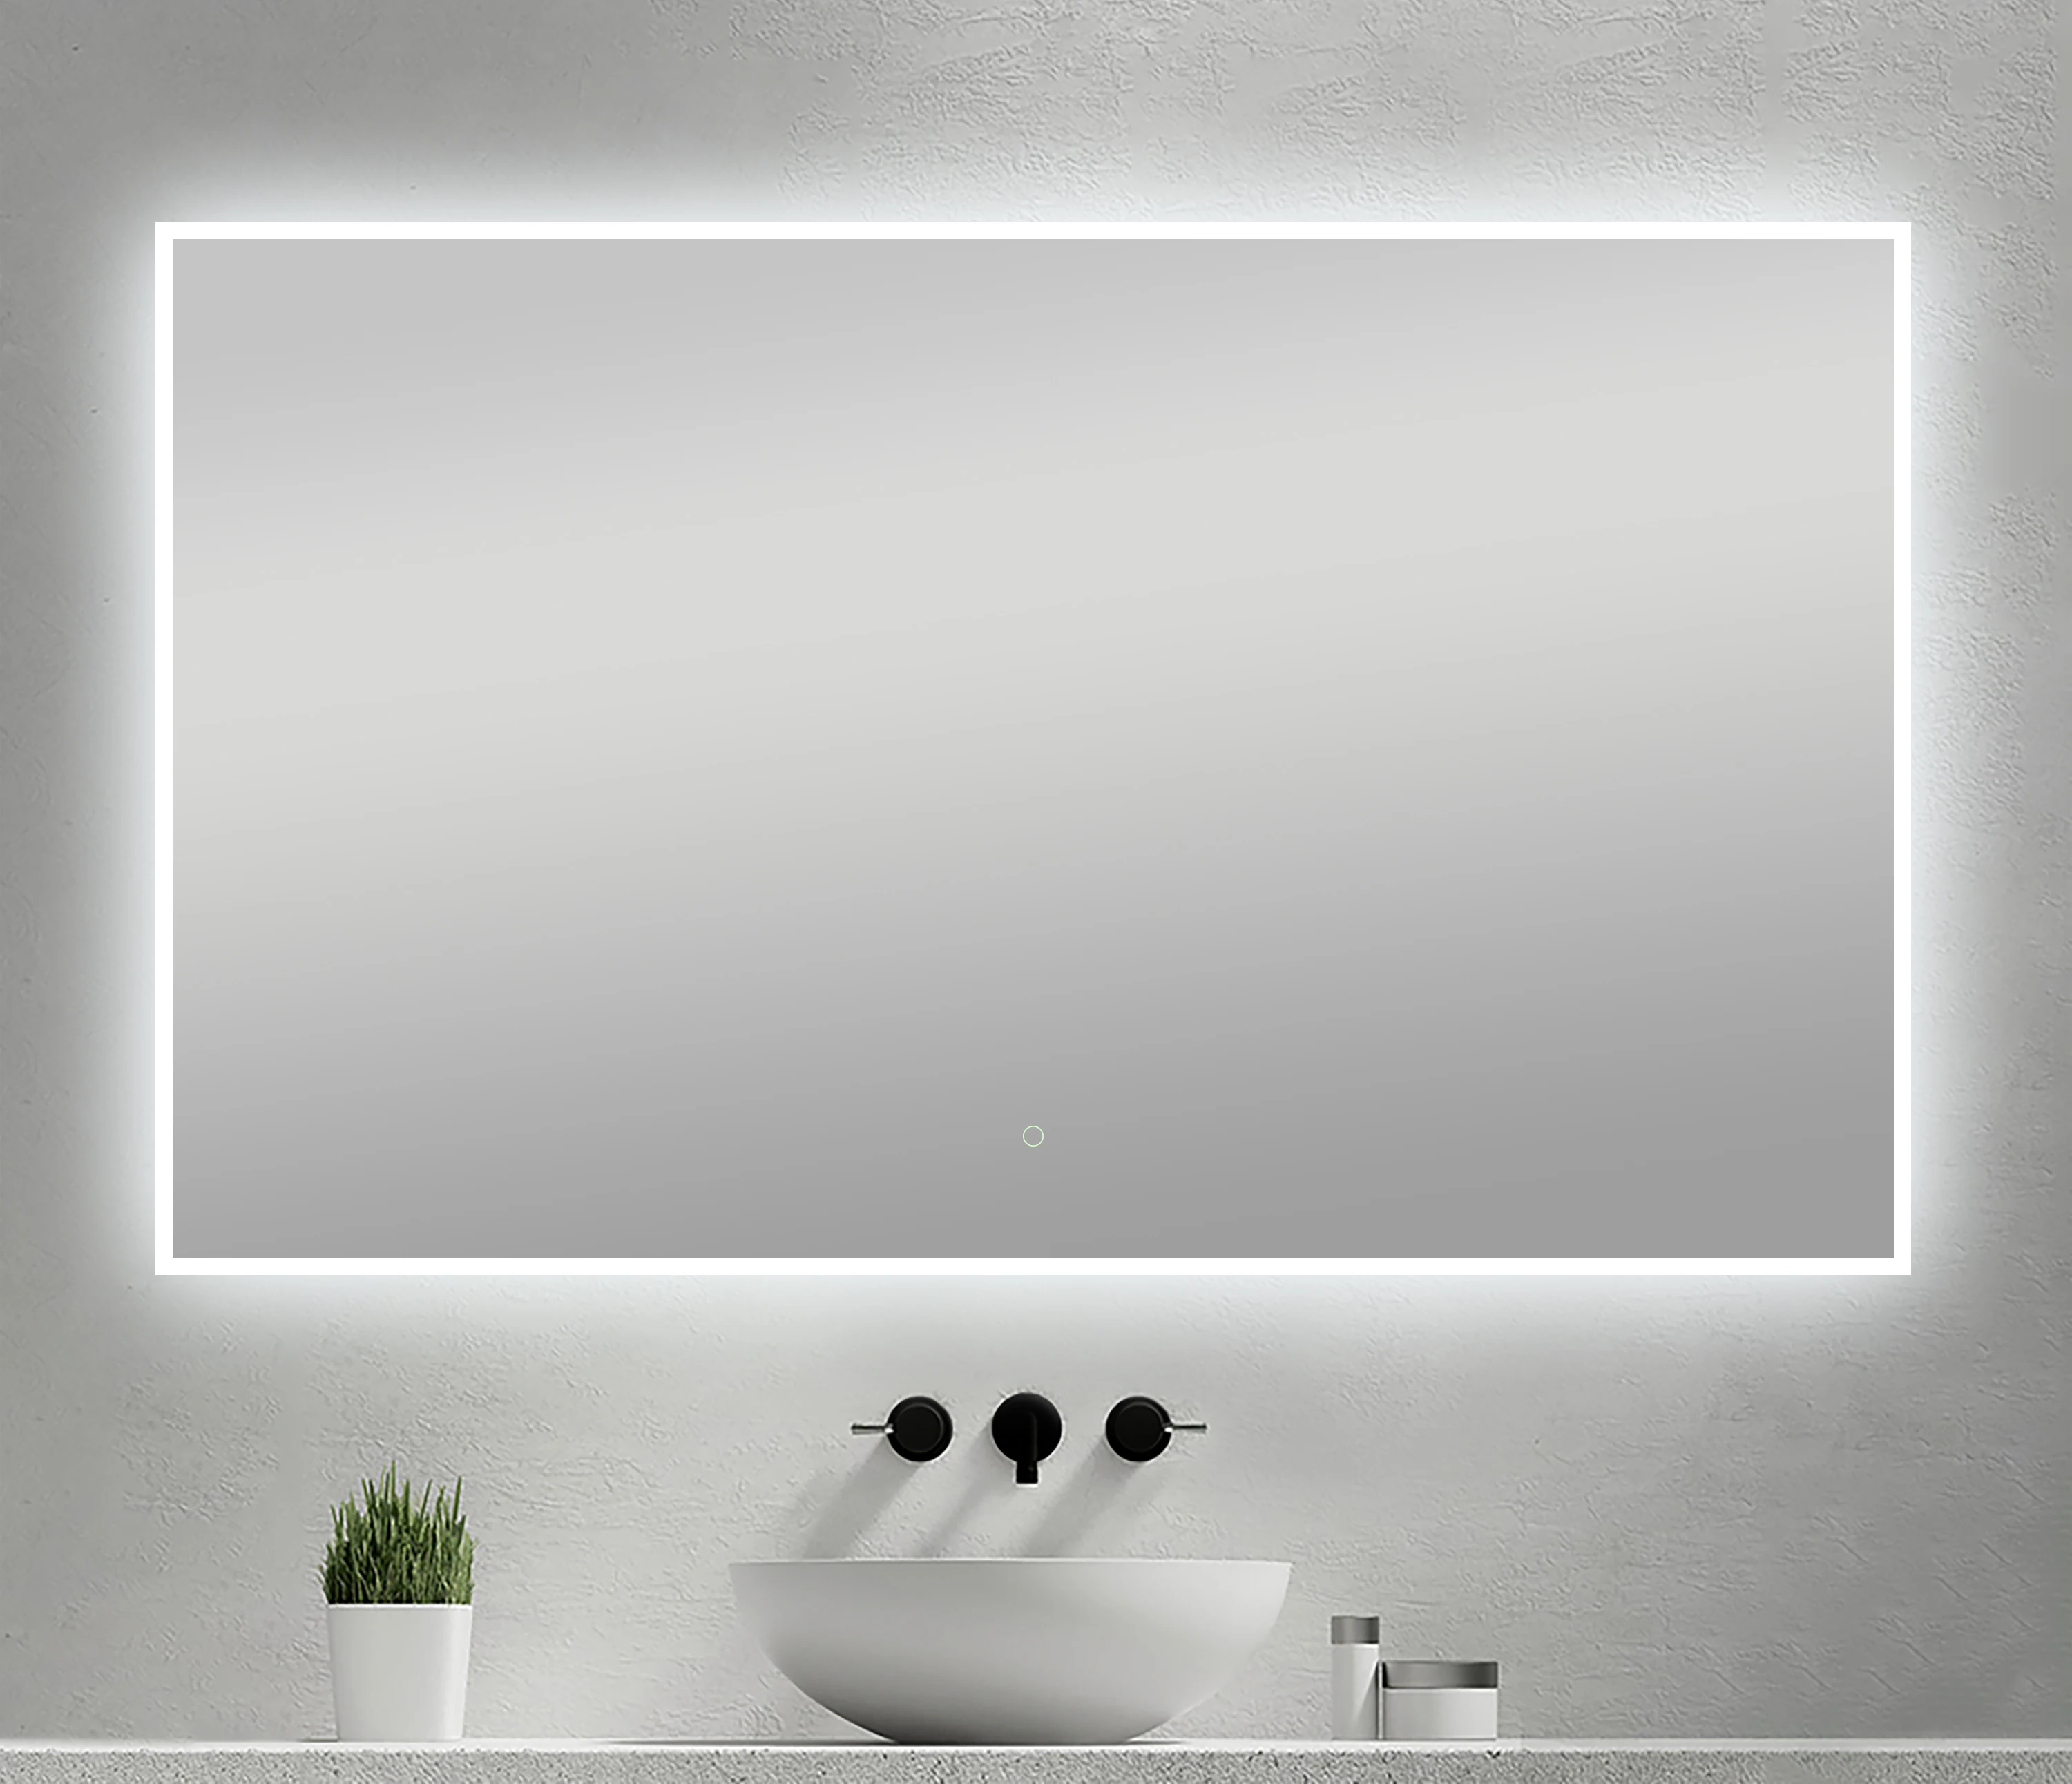 Horizontal and vertical hanging wall mounted mirrors modern bathroom furniture rectangle shaped LED smart mirror